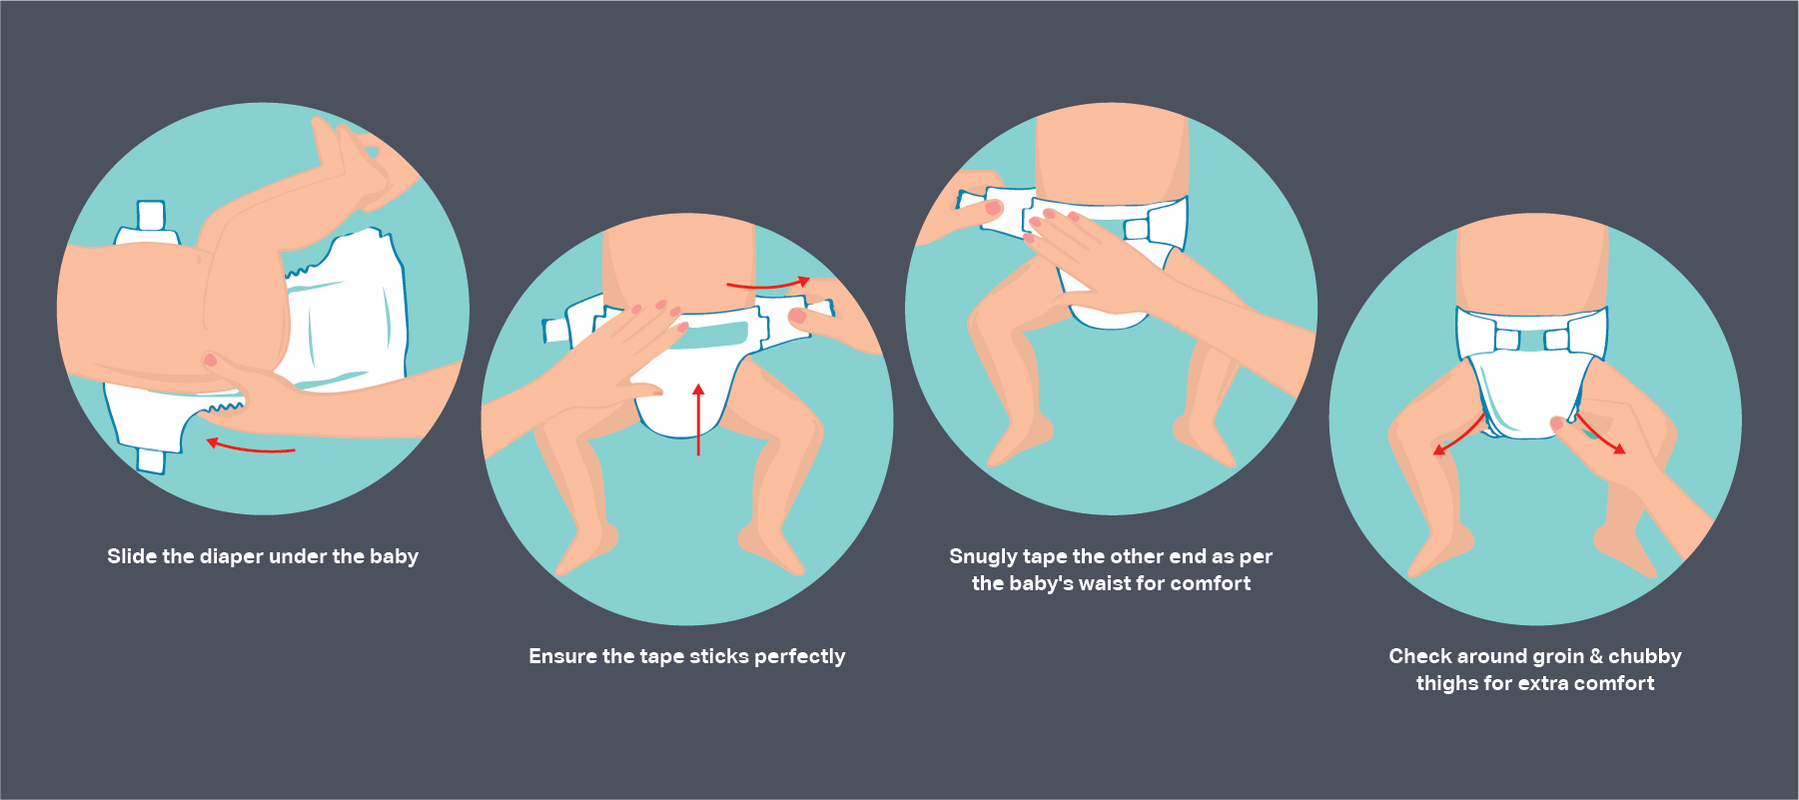 Steps to put Diaper on a Baby